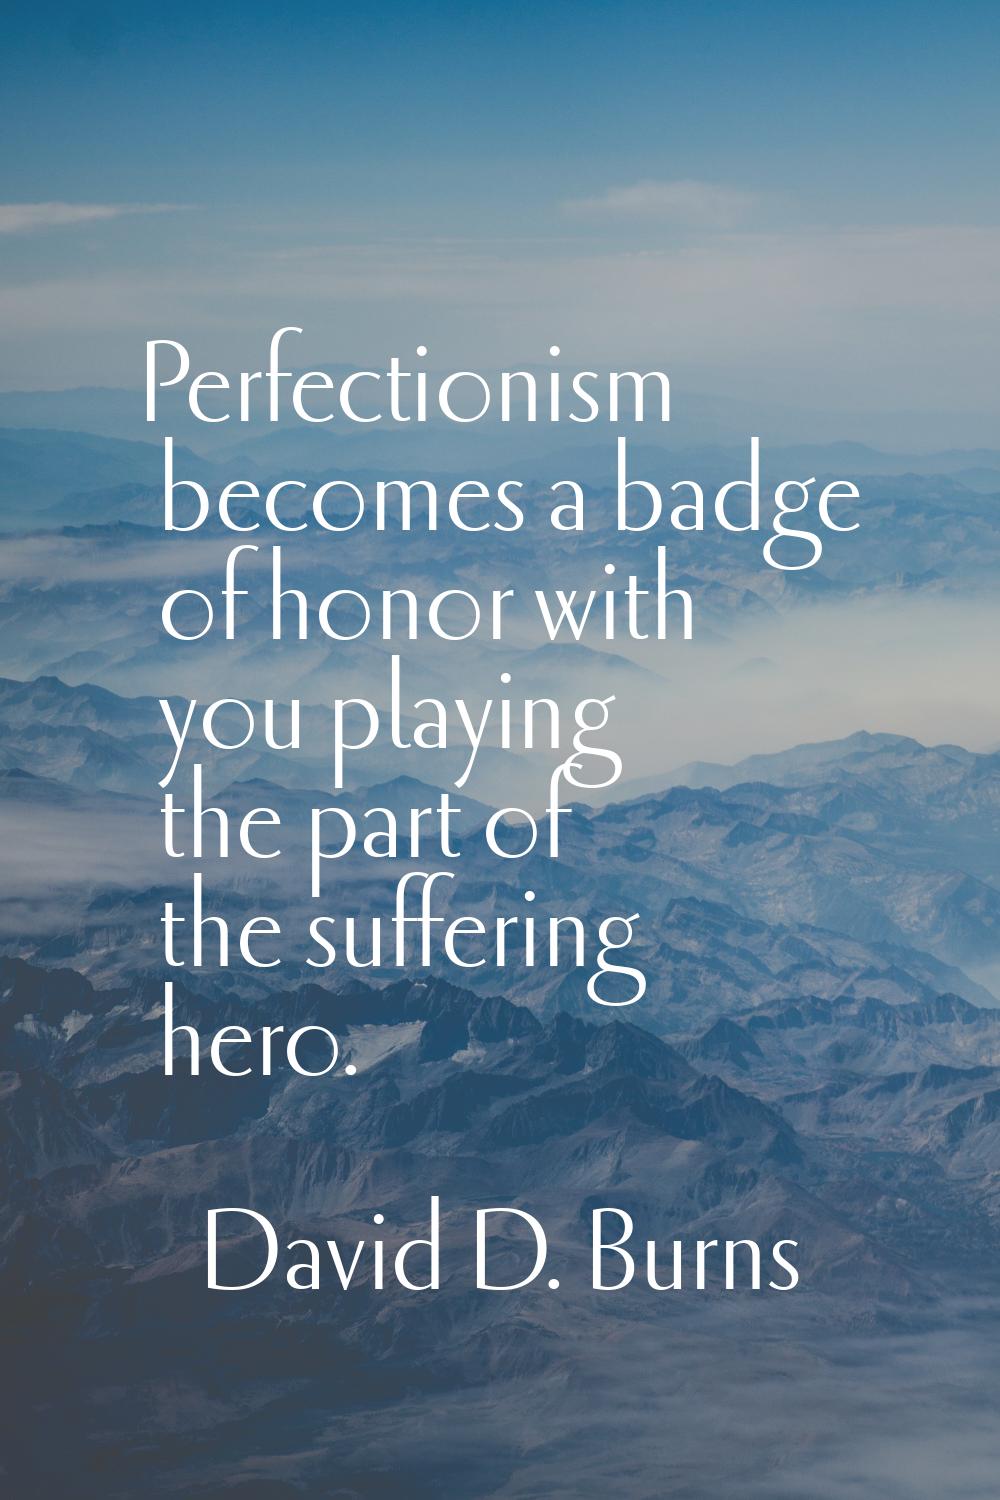 Perfectionism becomes a badge of honor with you playing the part of the suffering hero.